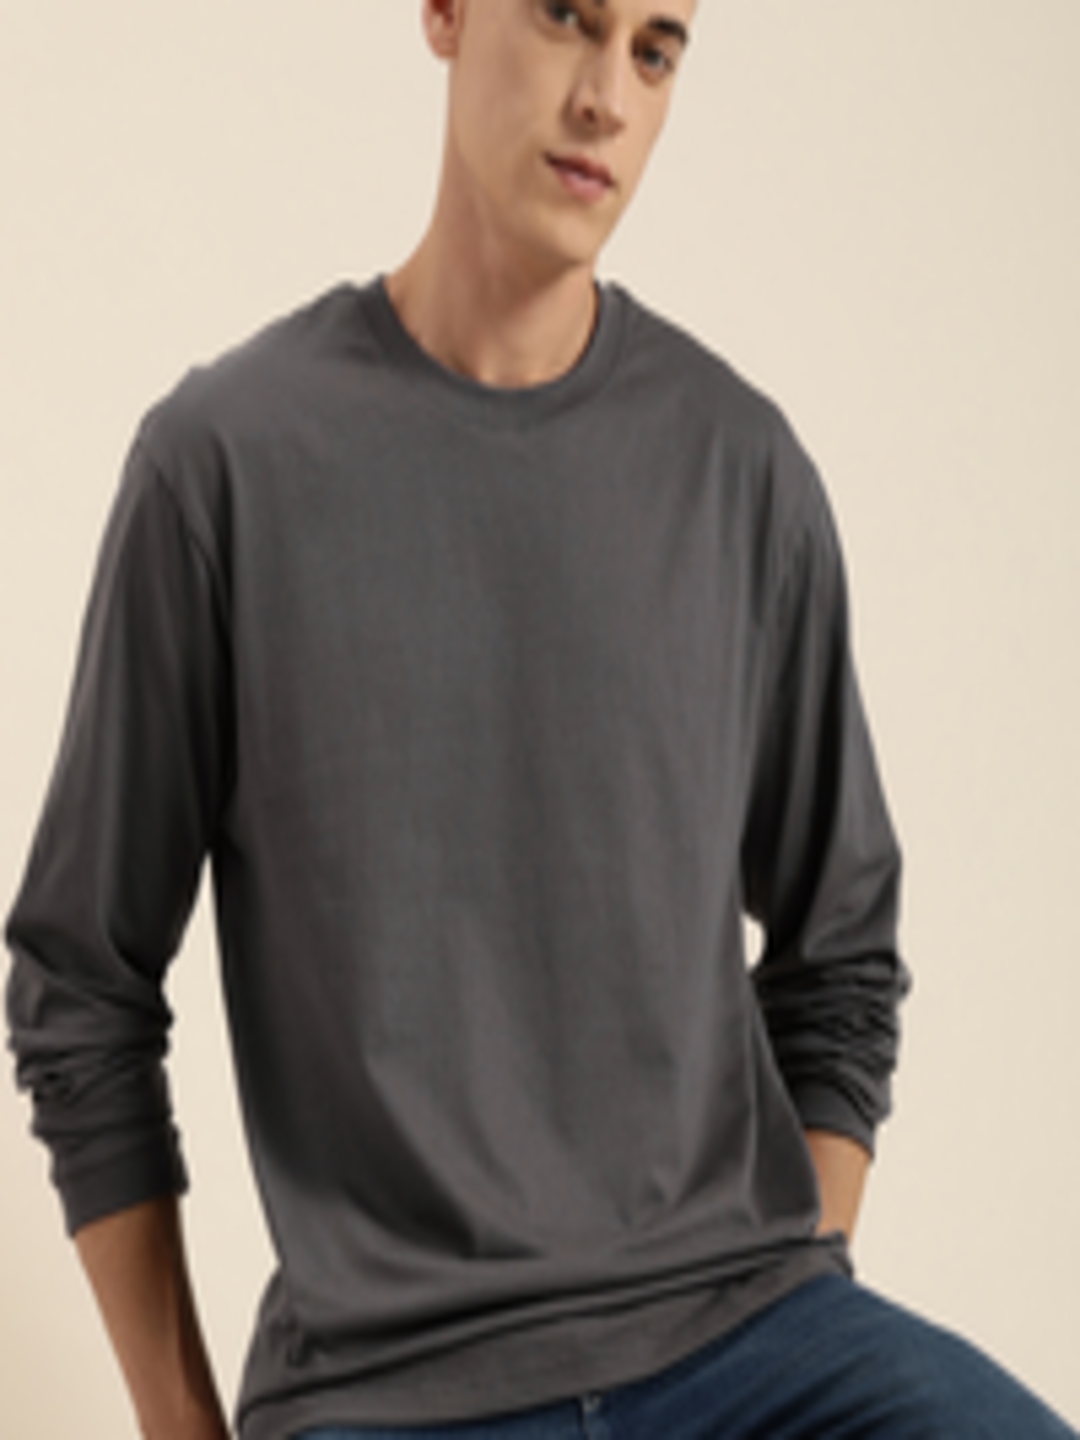 Buy Difference Of Opinion Men Charcoal Grey Cotton Drop Shoulder ...